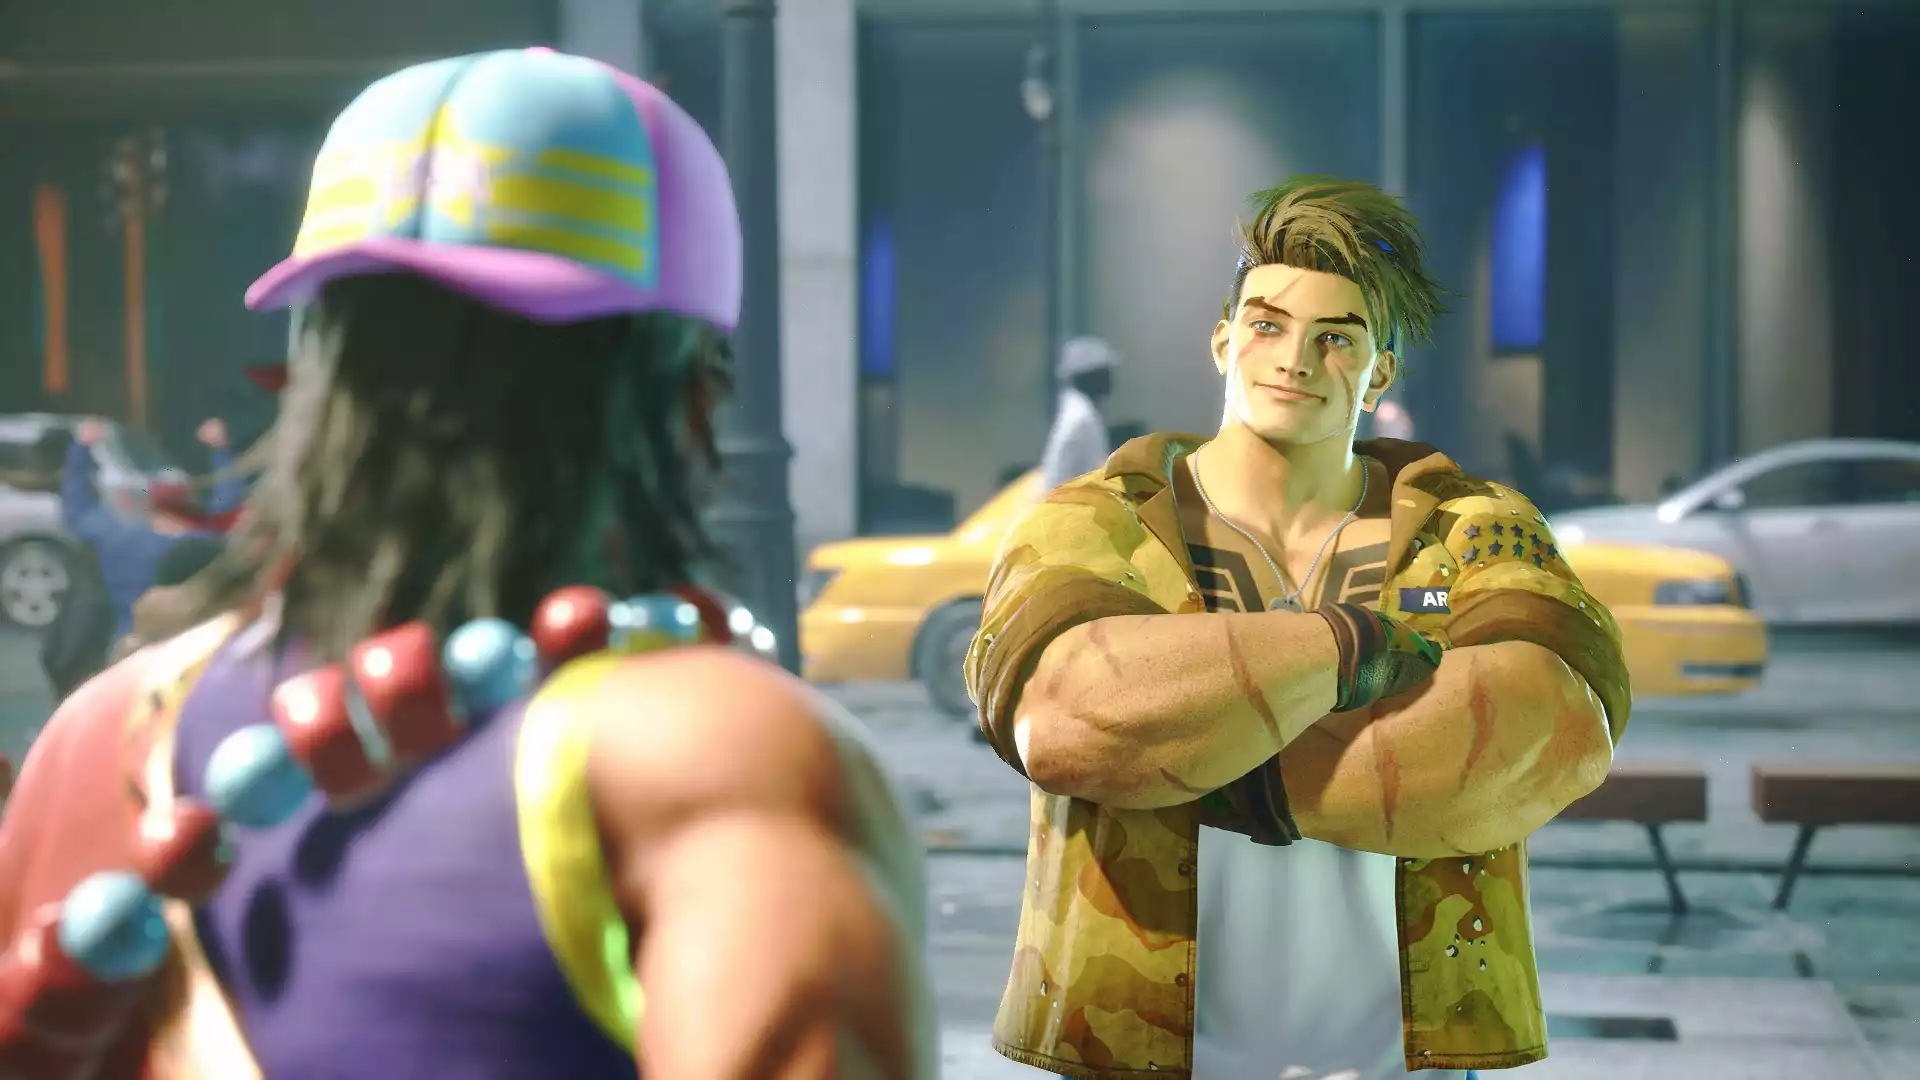 Find out how tall Luke is in Street Fighter 6